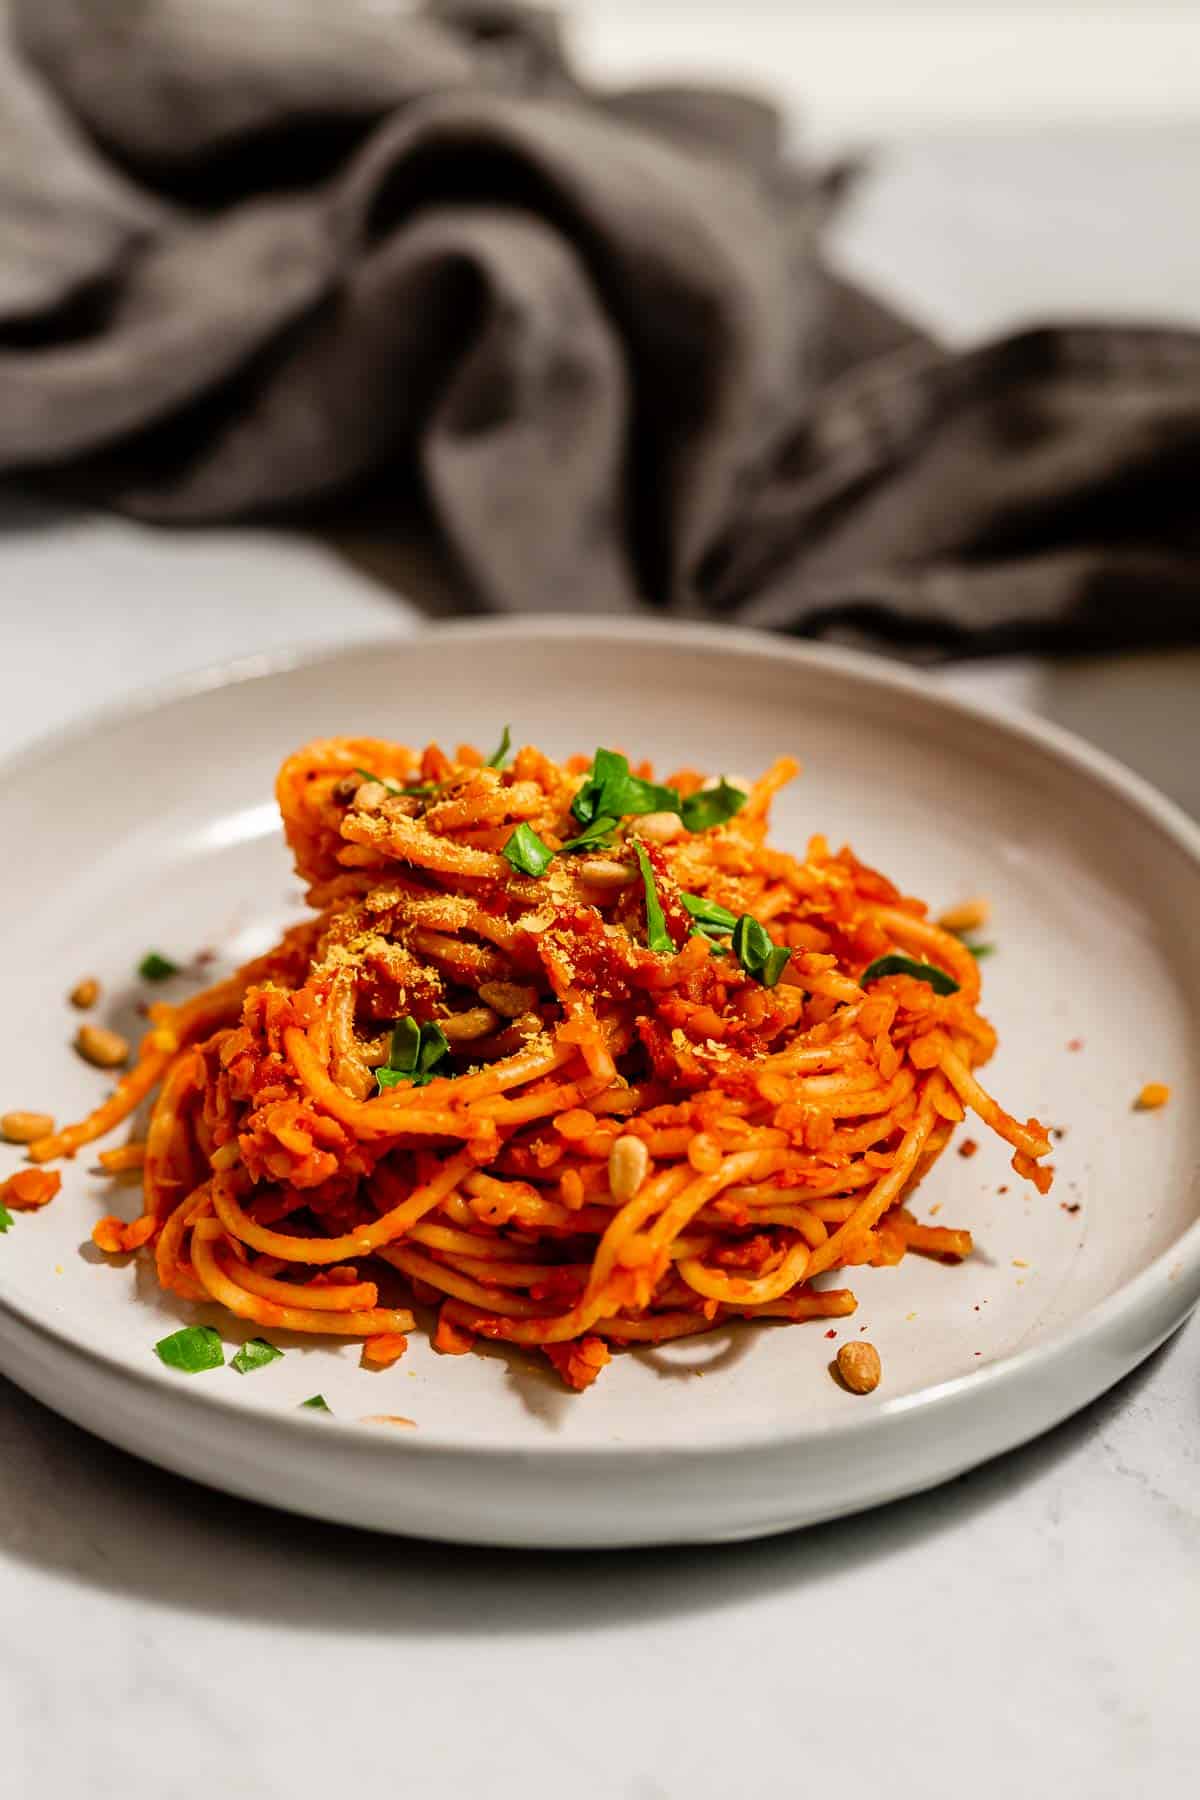 A side view of stacked red lentil bolognese spaghetti.